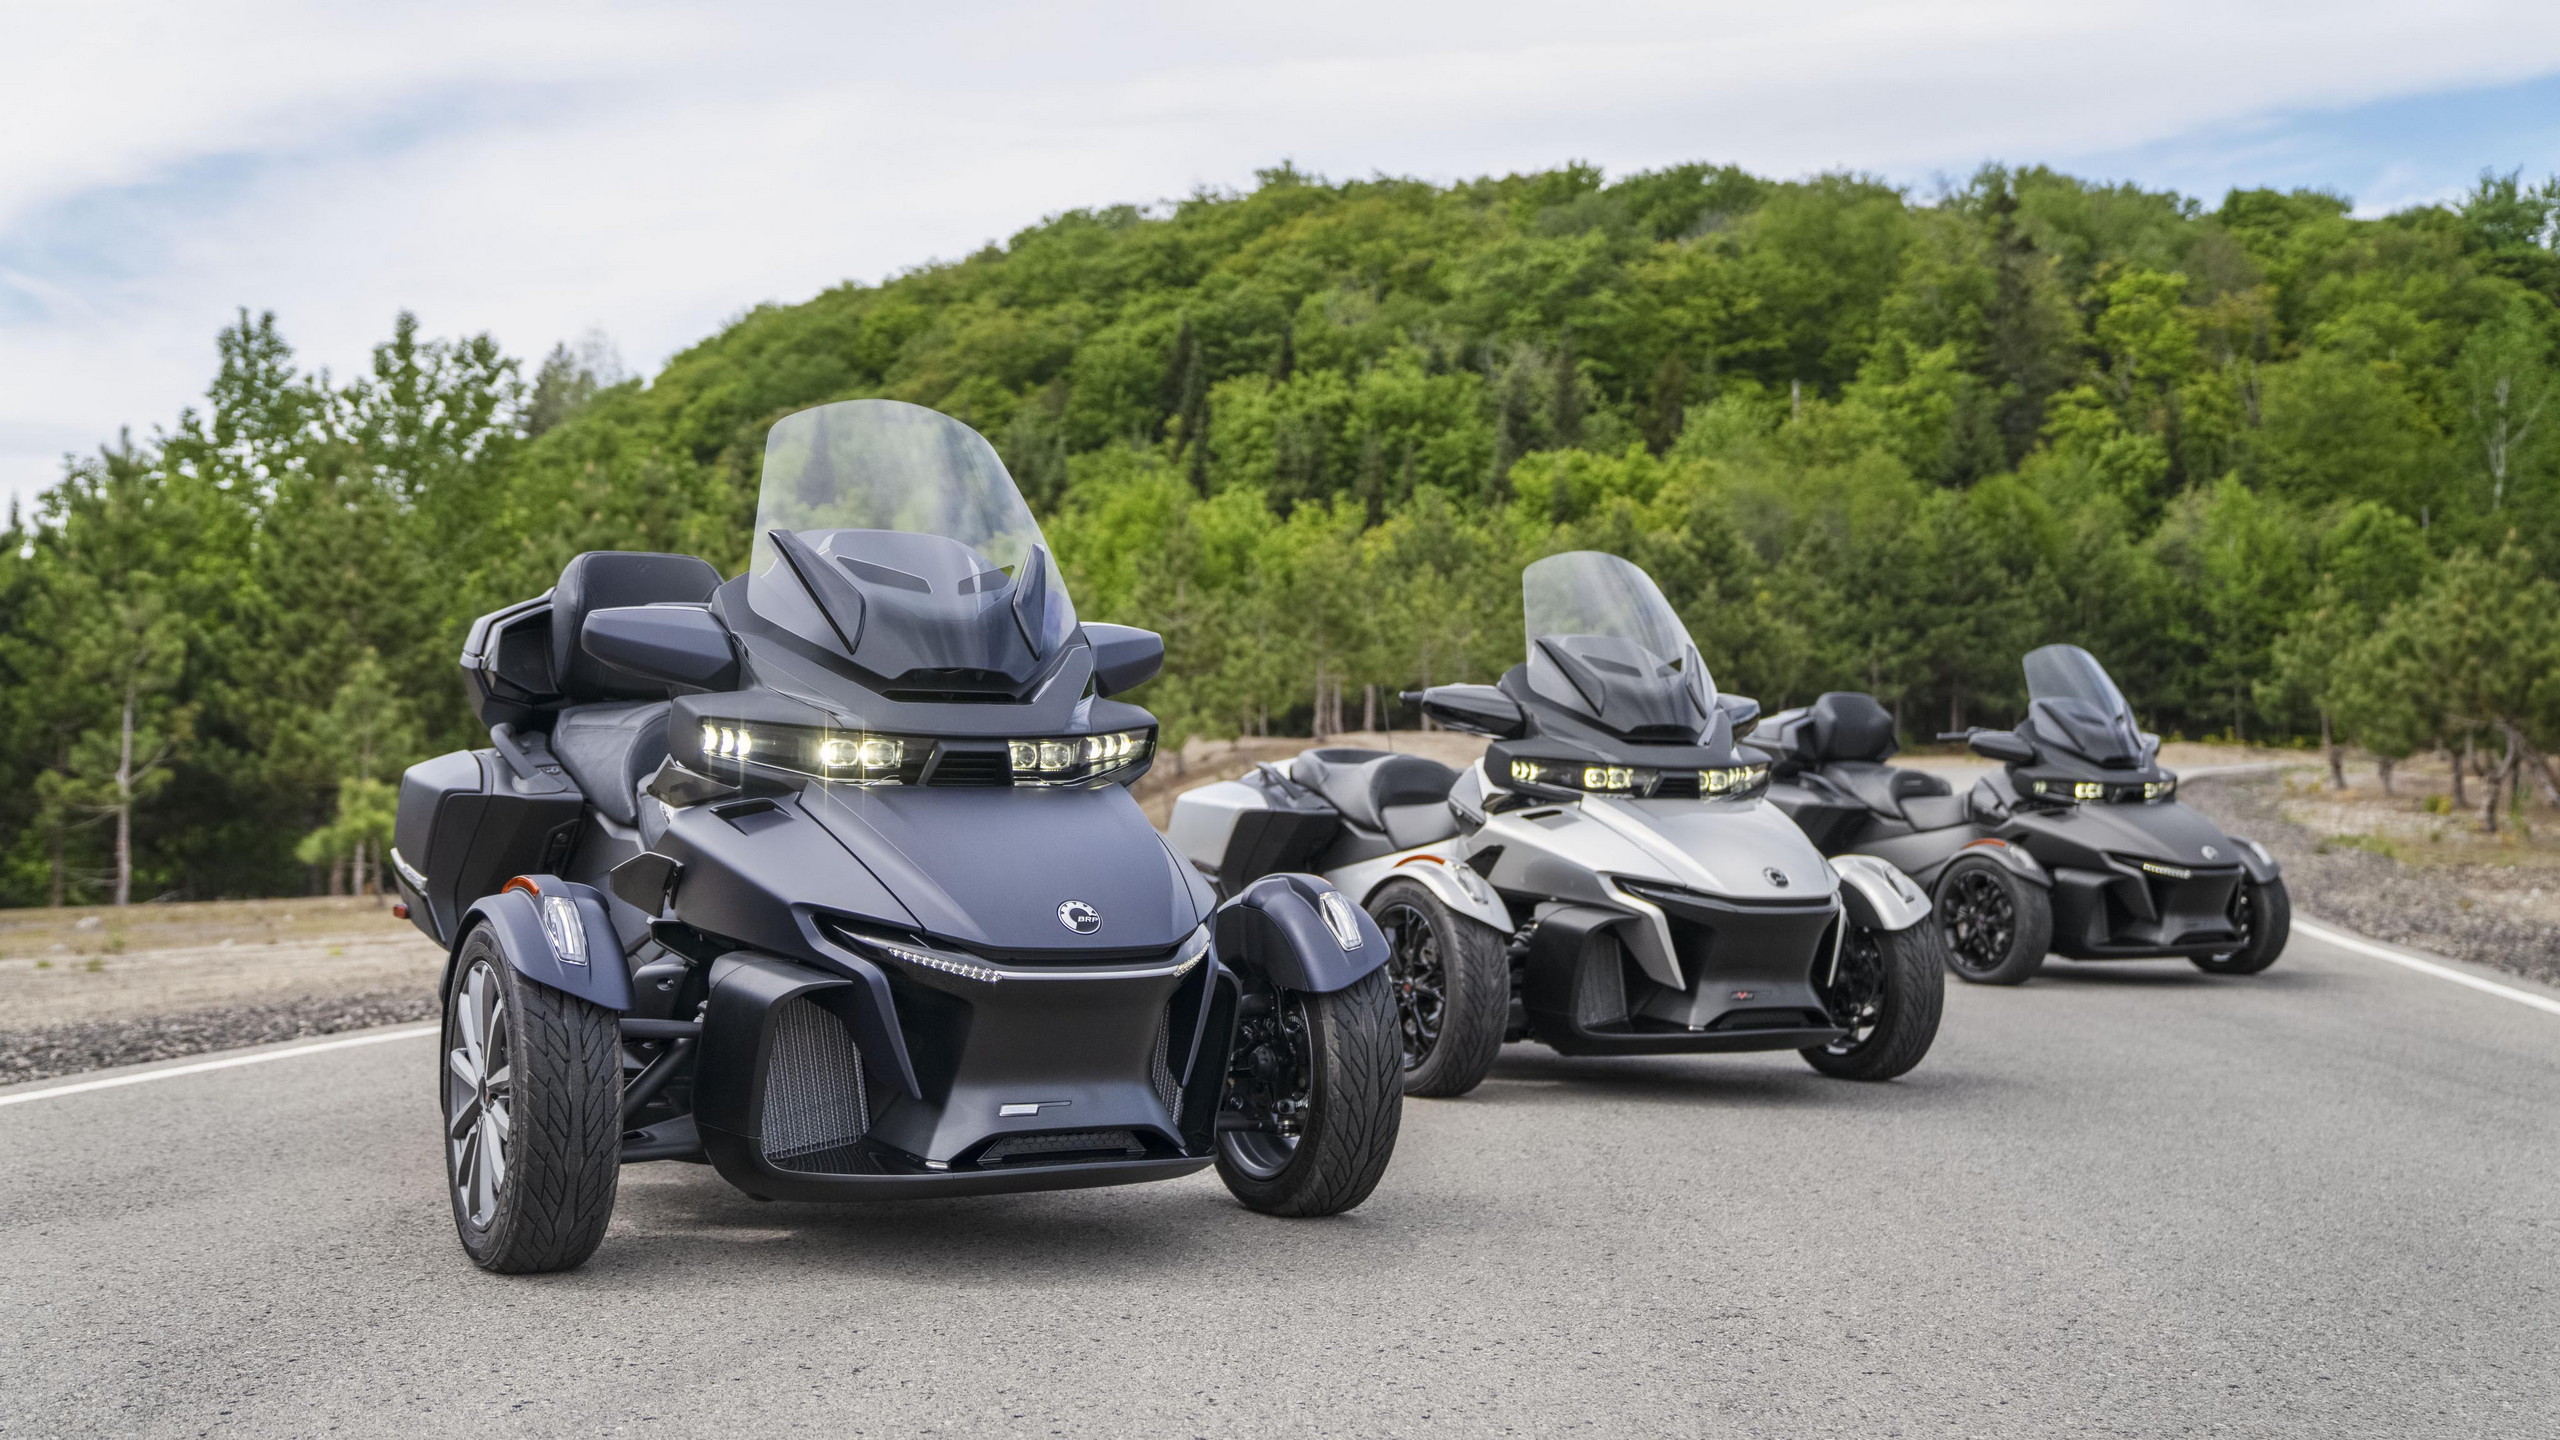 2022 Can-Am Spyder RT Is All About Luxury Cruising, Promises Wild 3-Wheel  Fun - autoevolution